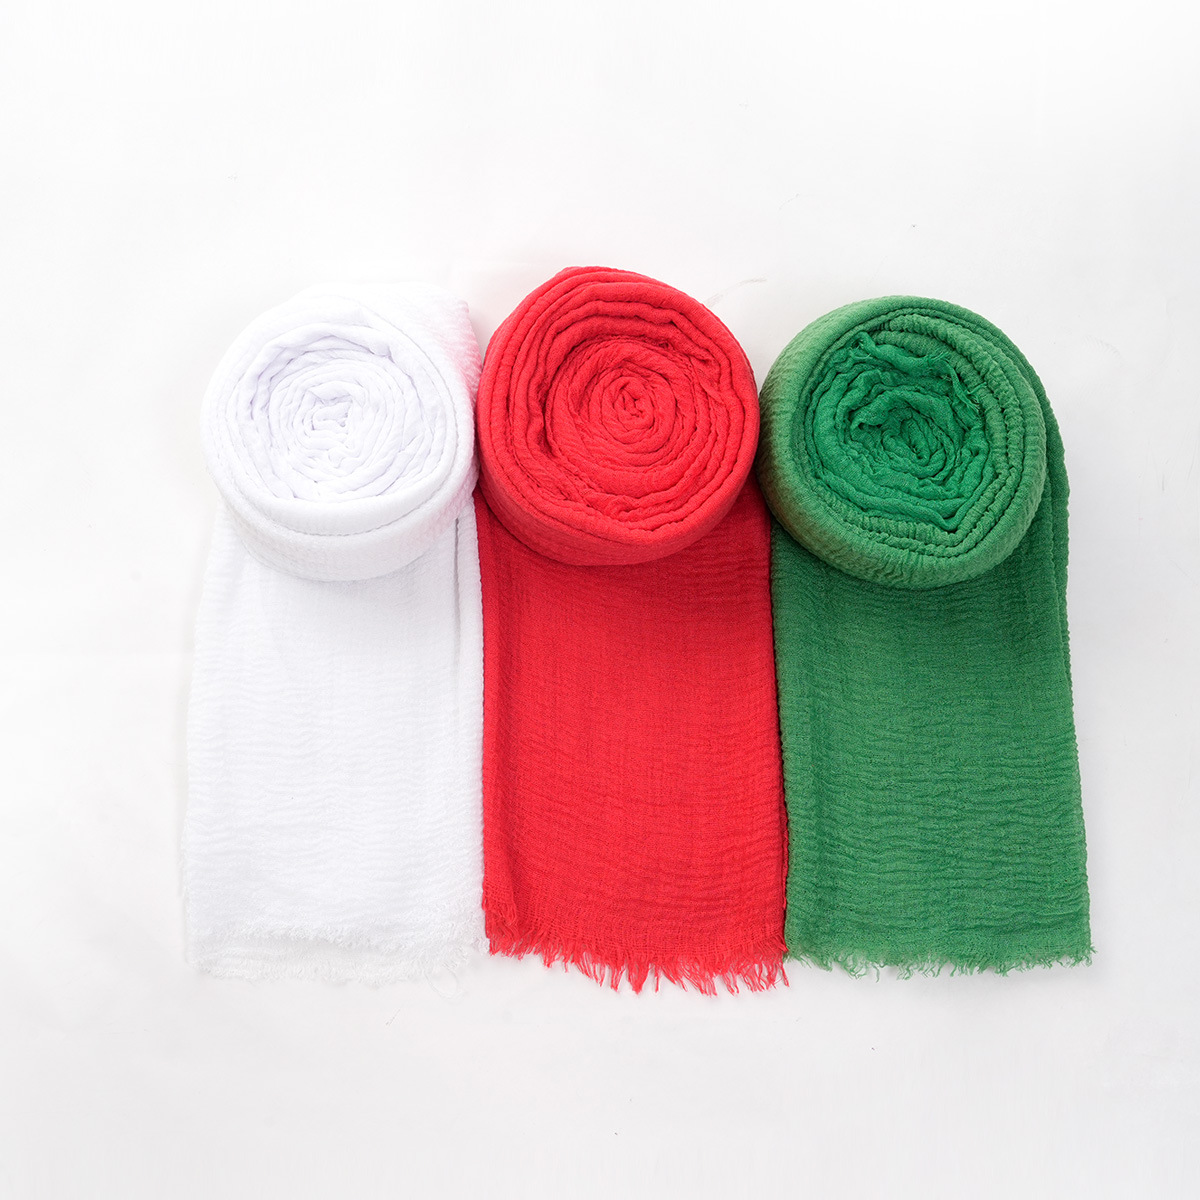 Exclusive for Cross-Border New 1 Group 3 Pack Solid Color Cotton and Linen Scarf Women's Artistic Sunscreen Scarf Small Scarf Beach Scarf